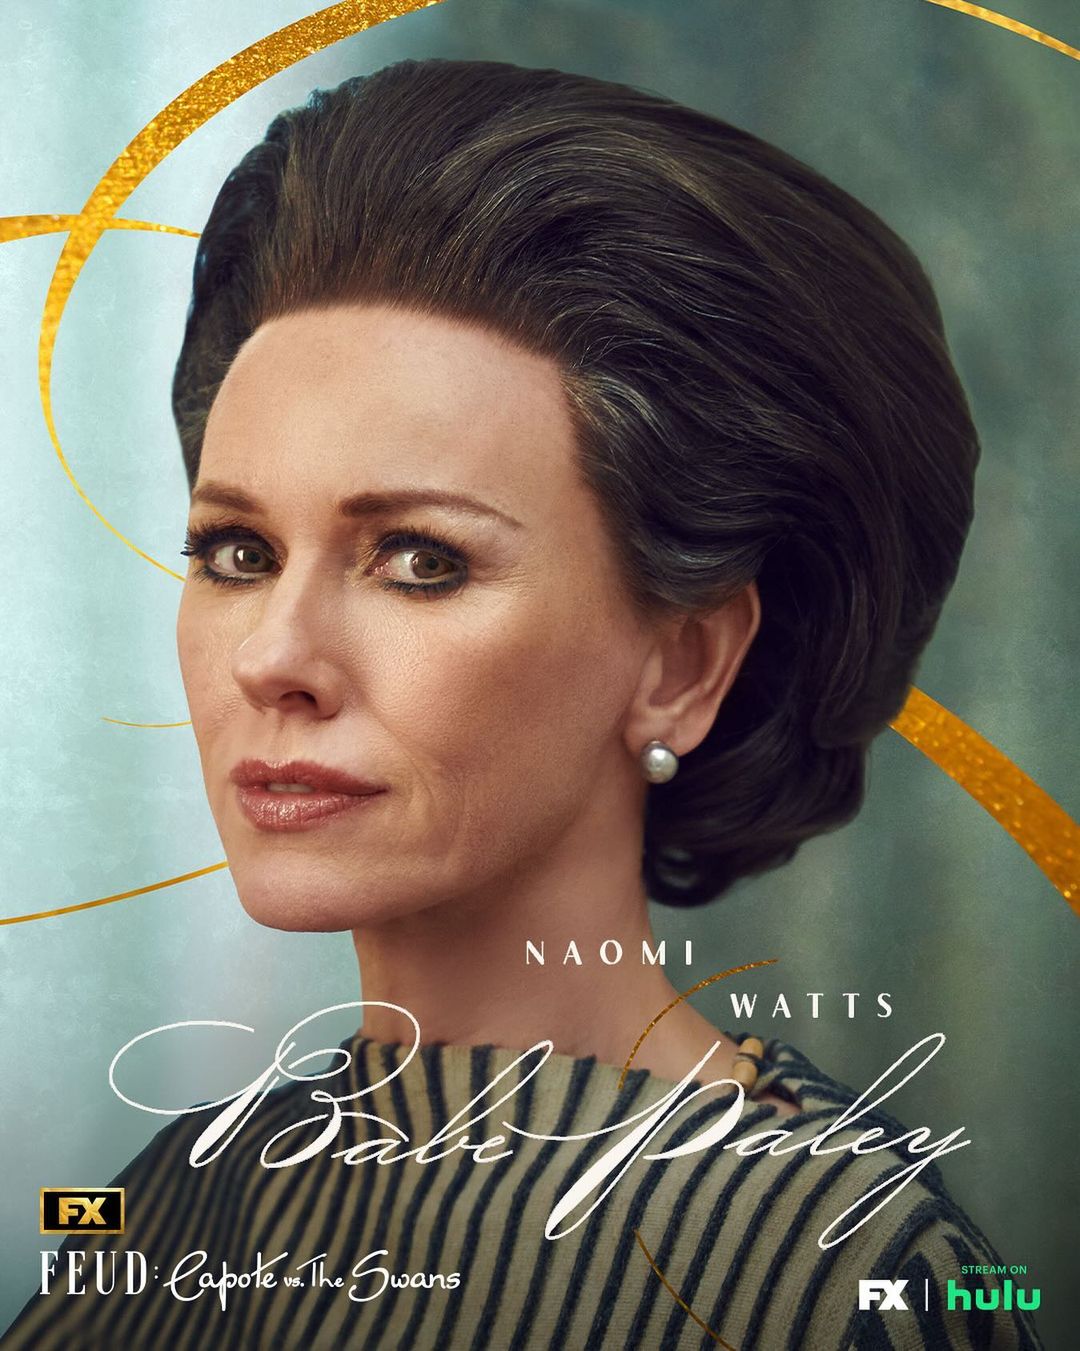 Naomi Watts plays Babe Paley in "FEUD: Capote vs. The Swans"